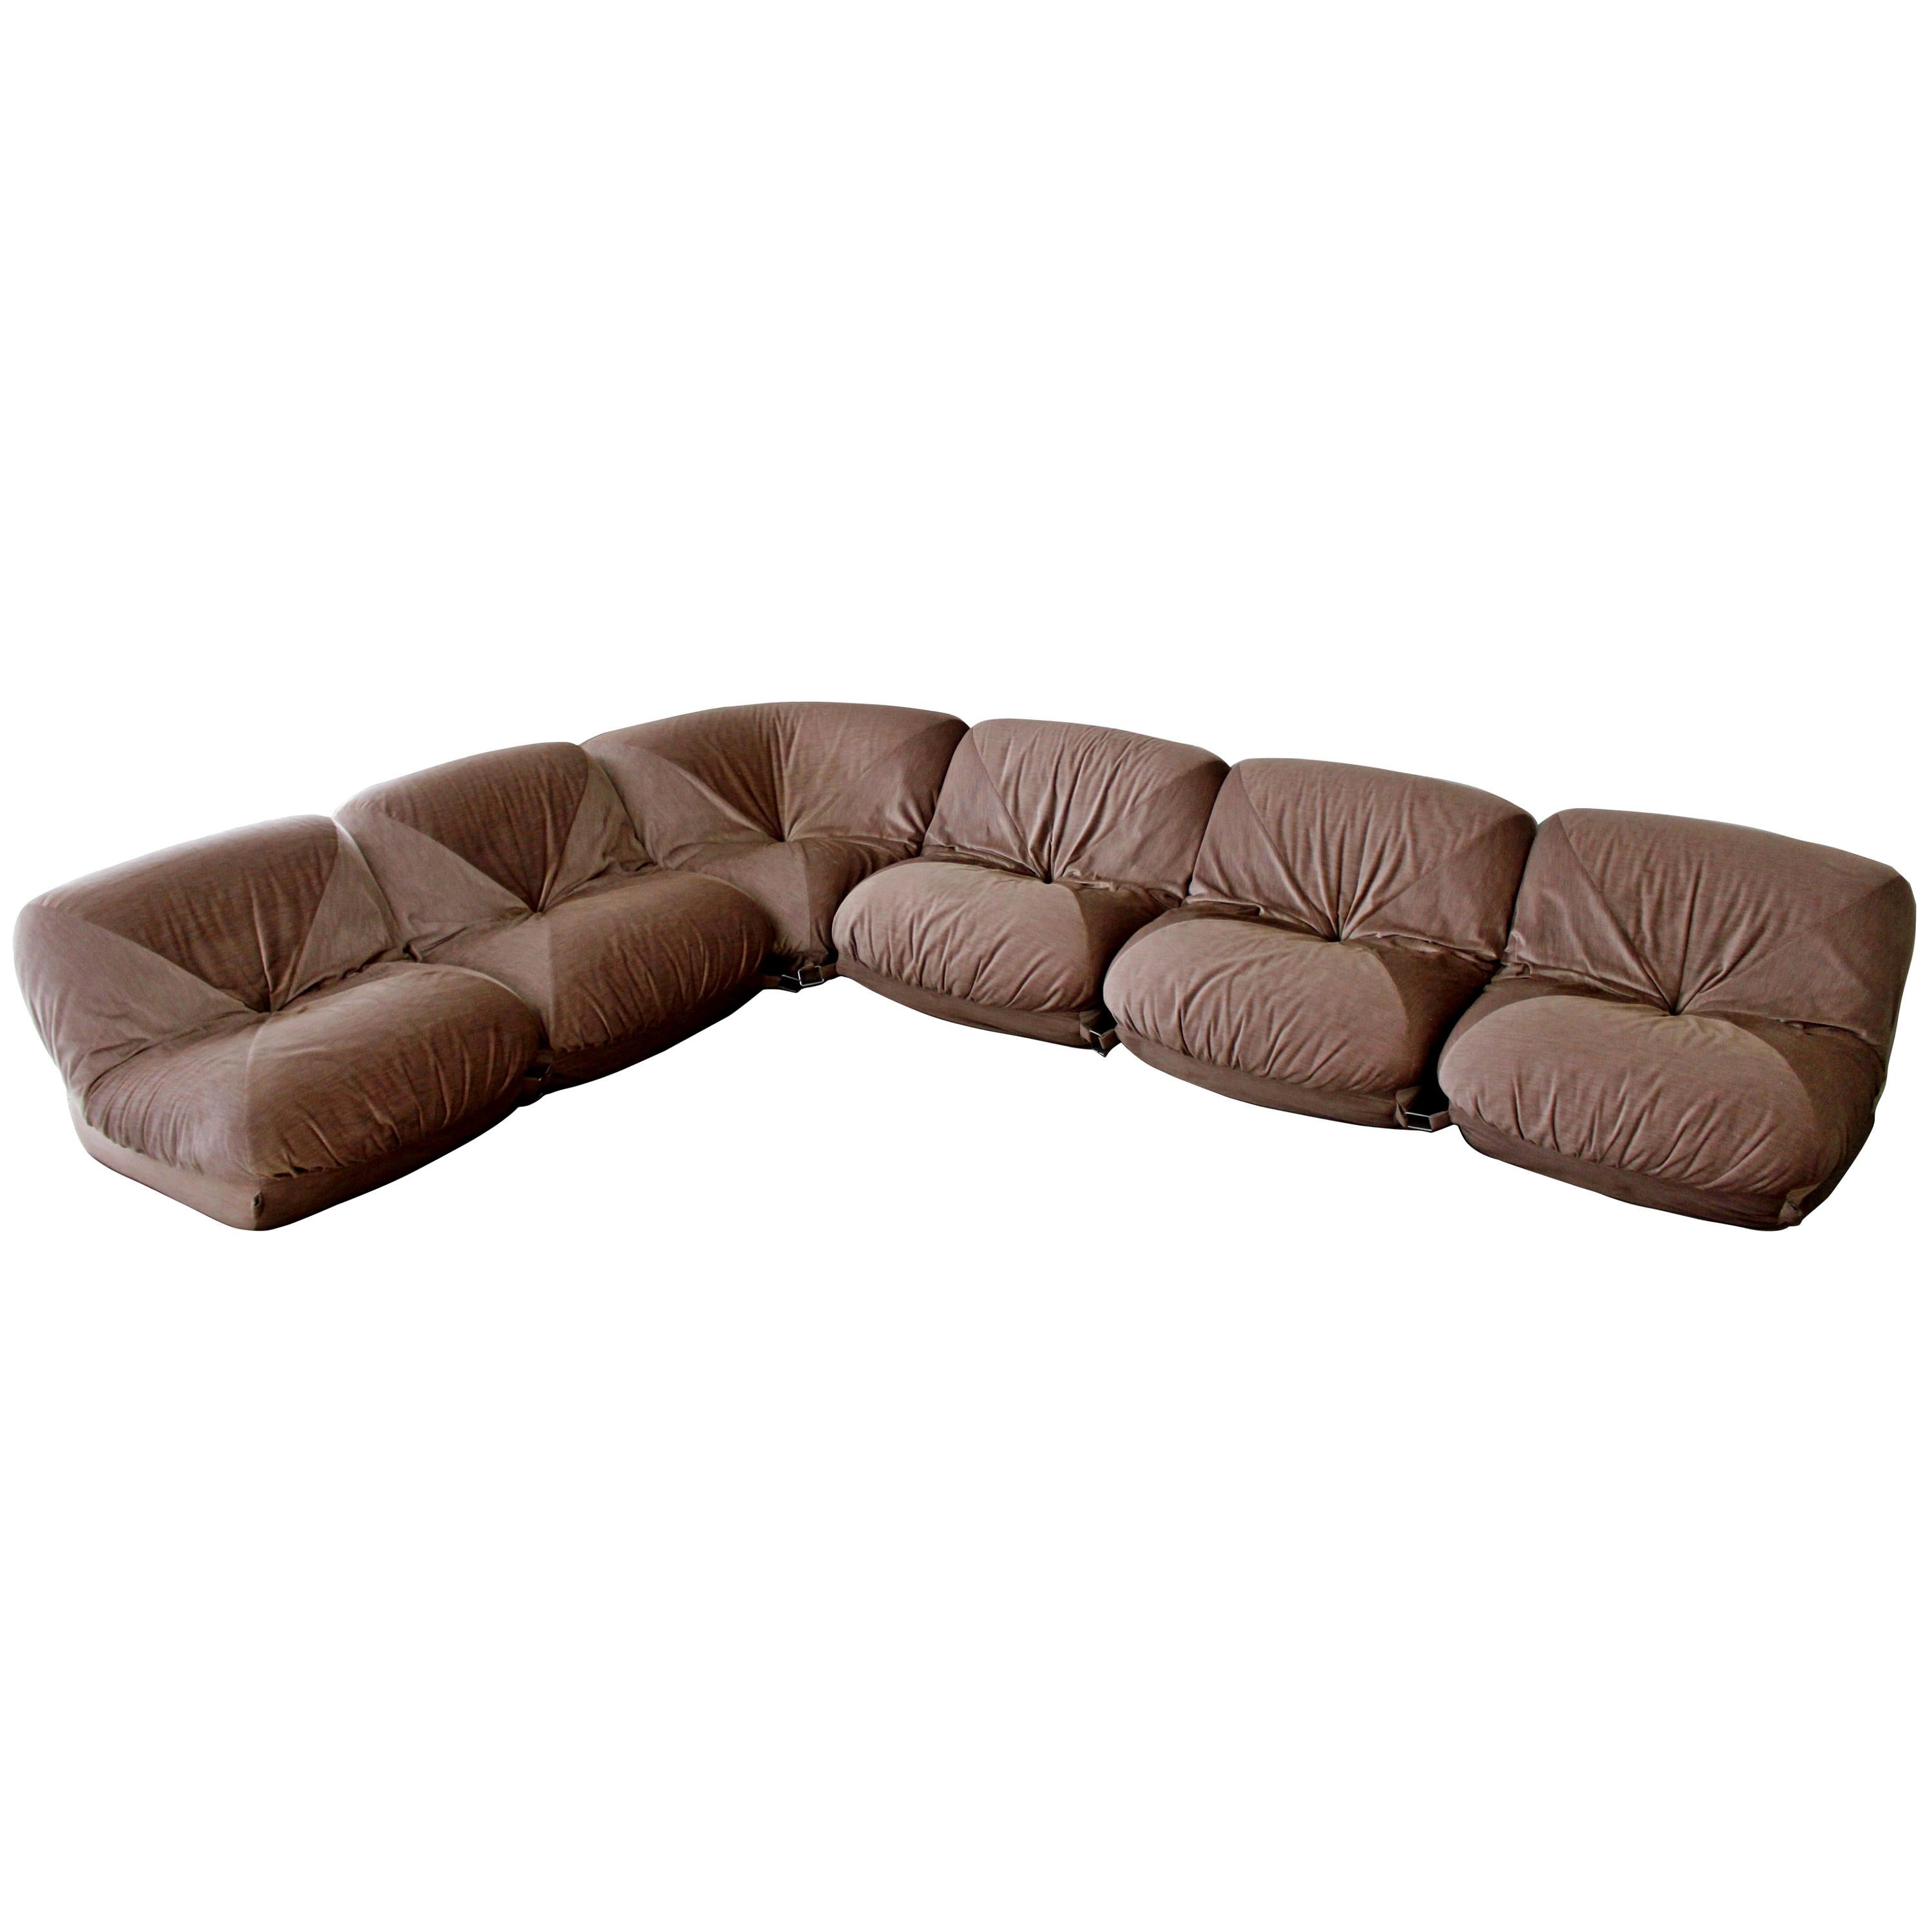 Mid-Century Modern Airborne Patate Six-Piece Sectional Sofa 1970s Velvet, French